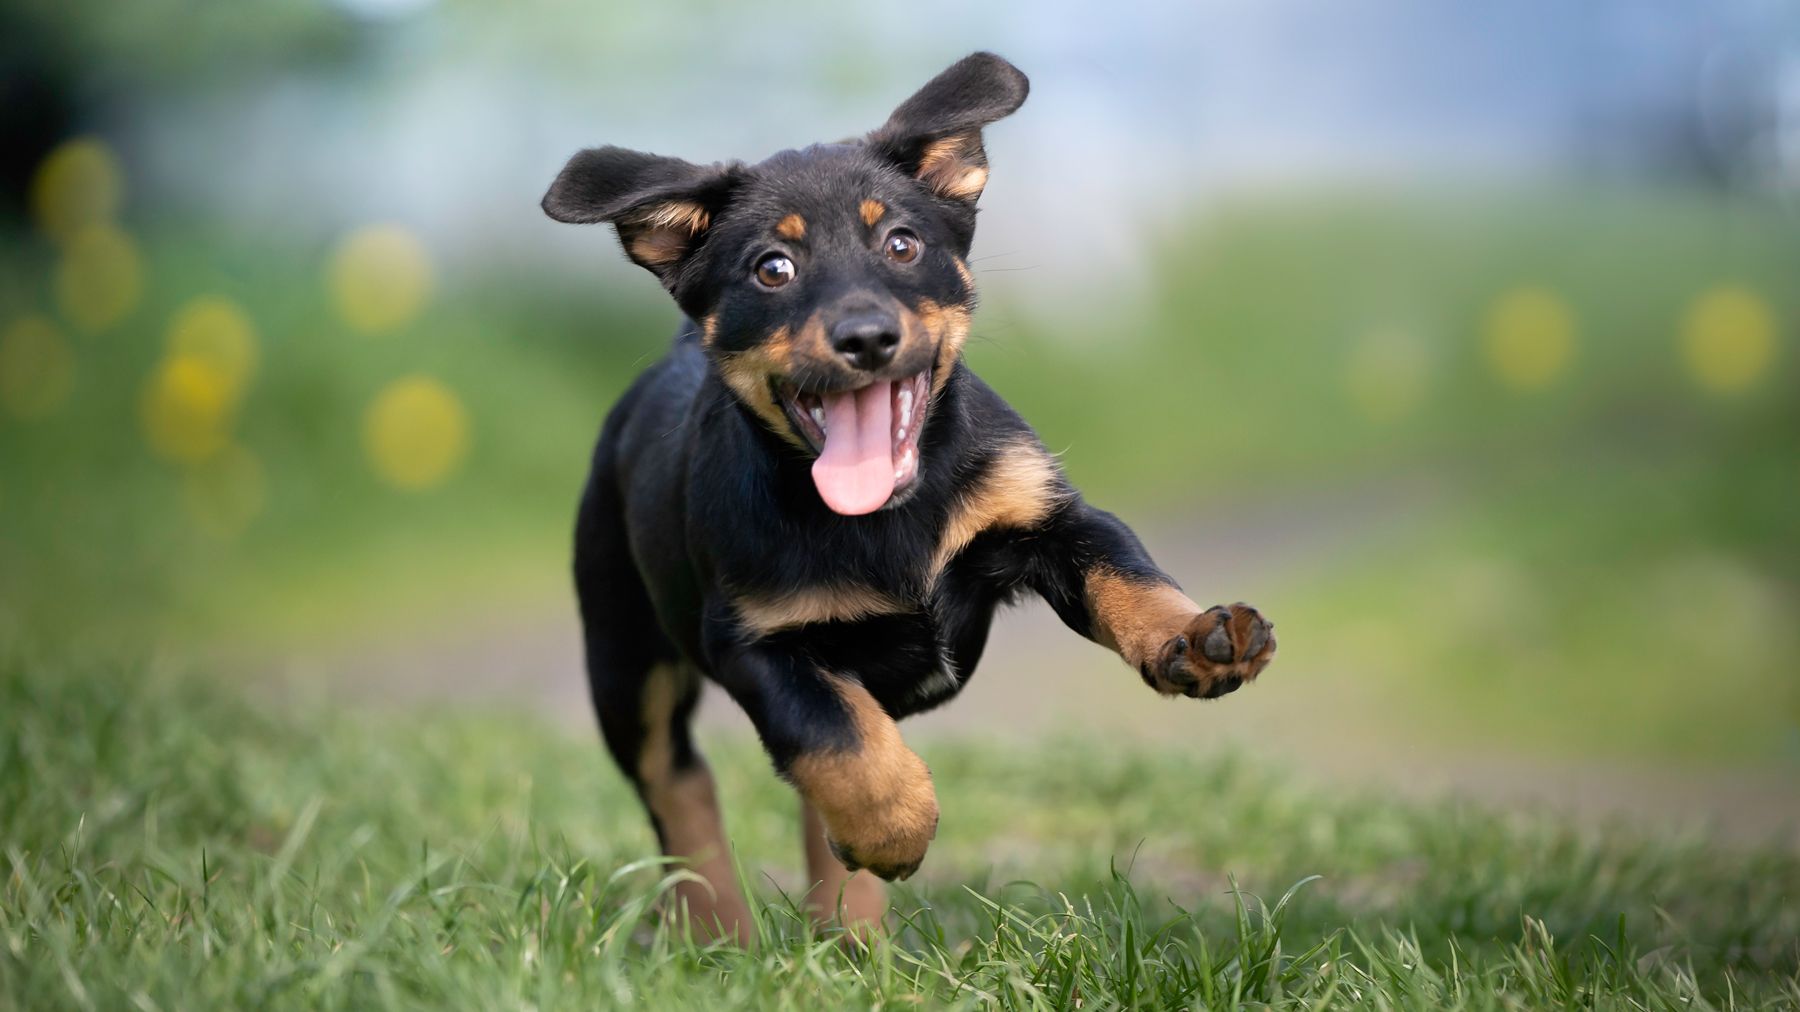 <p>                     Panting is normal behavior for an active dog and serves to help them cool down after exercise or a stint in the sun. While it may seem a bit drooly and messy, the mechanism that your dog uses to cool down - inhaling, humidifying the air, and then exhaling - is pretty neat.                   </p>